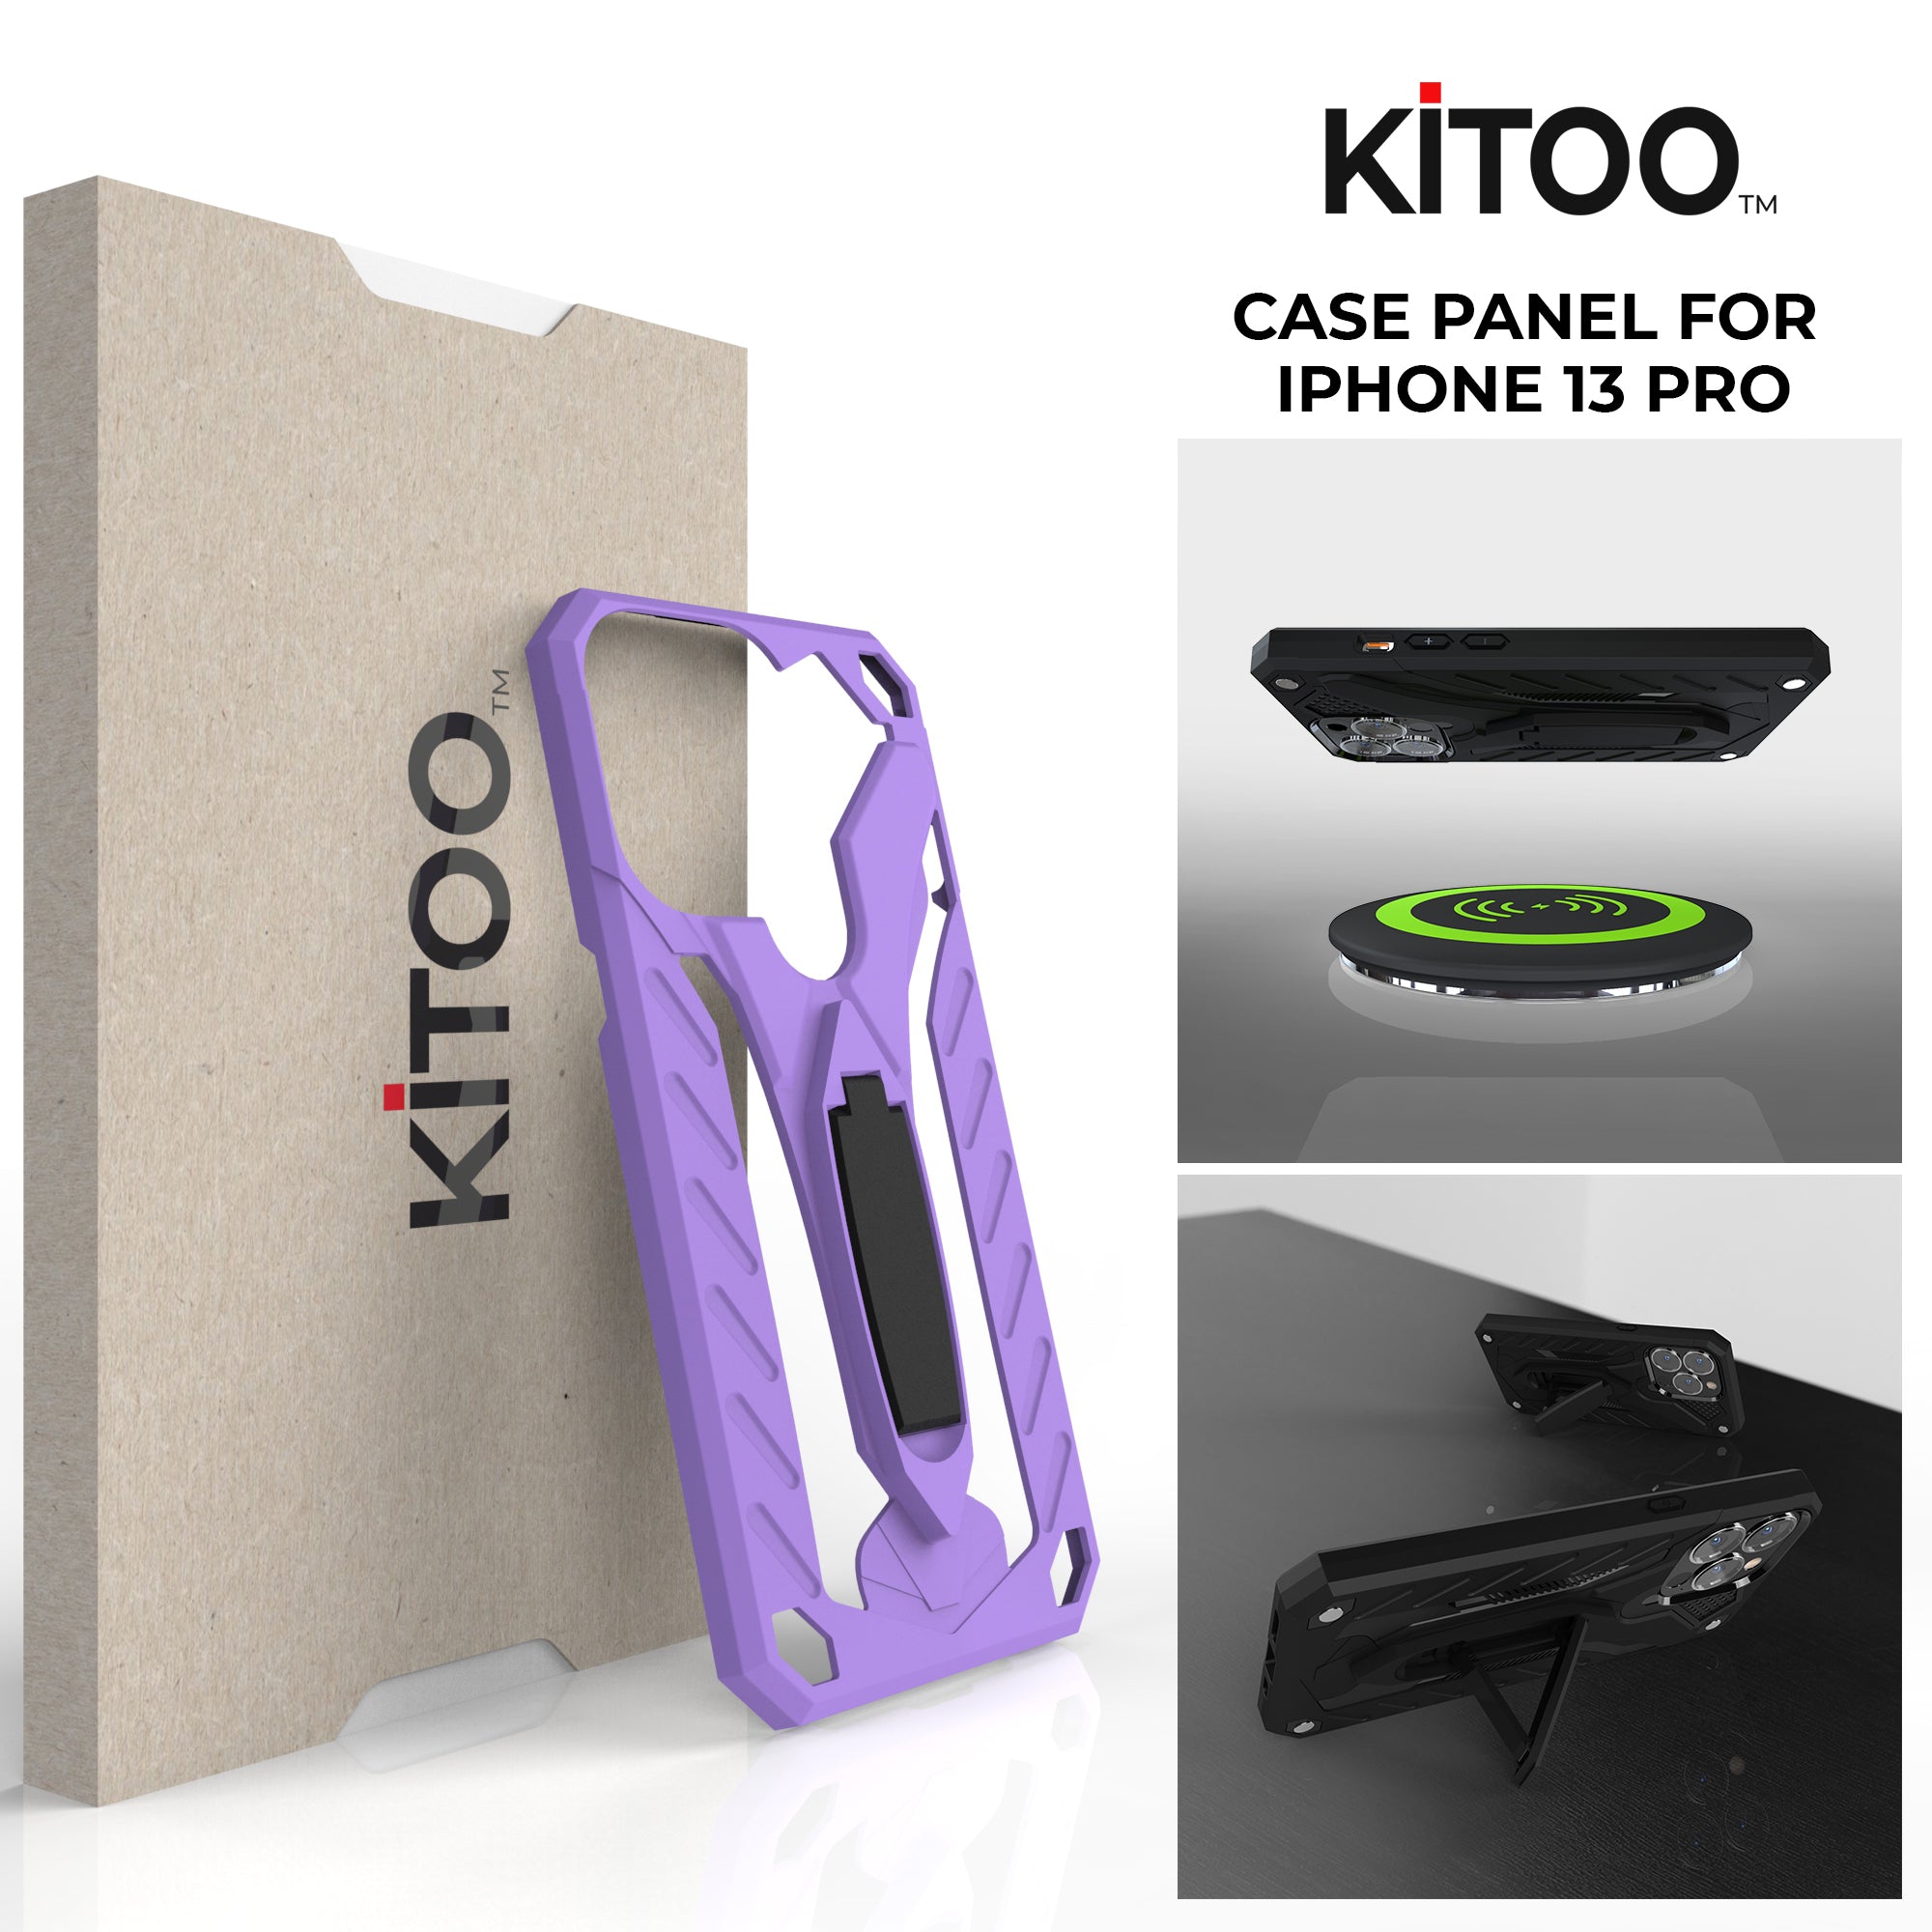 Kitoo Kickstand Panel Designed for iPhone 13 Pro case (Spare Part only) - Purple